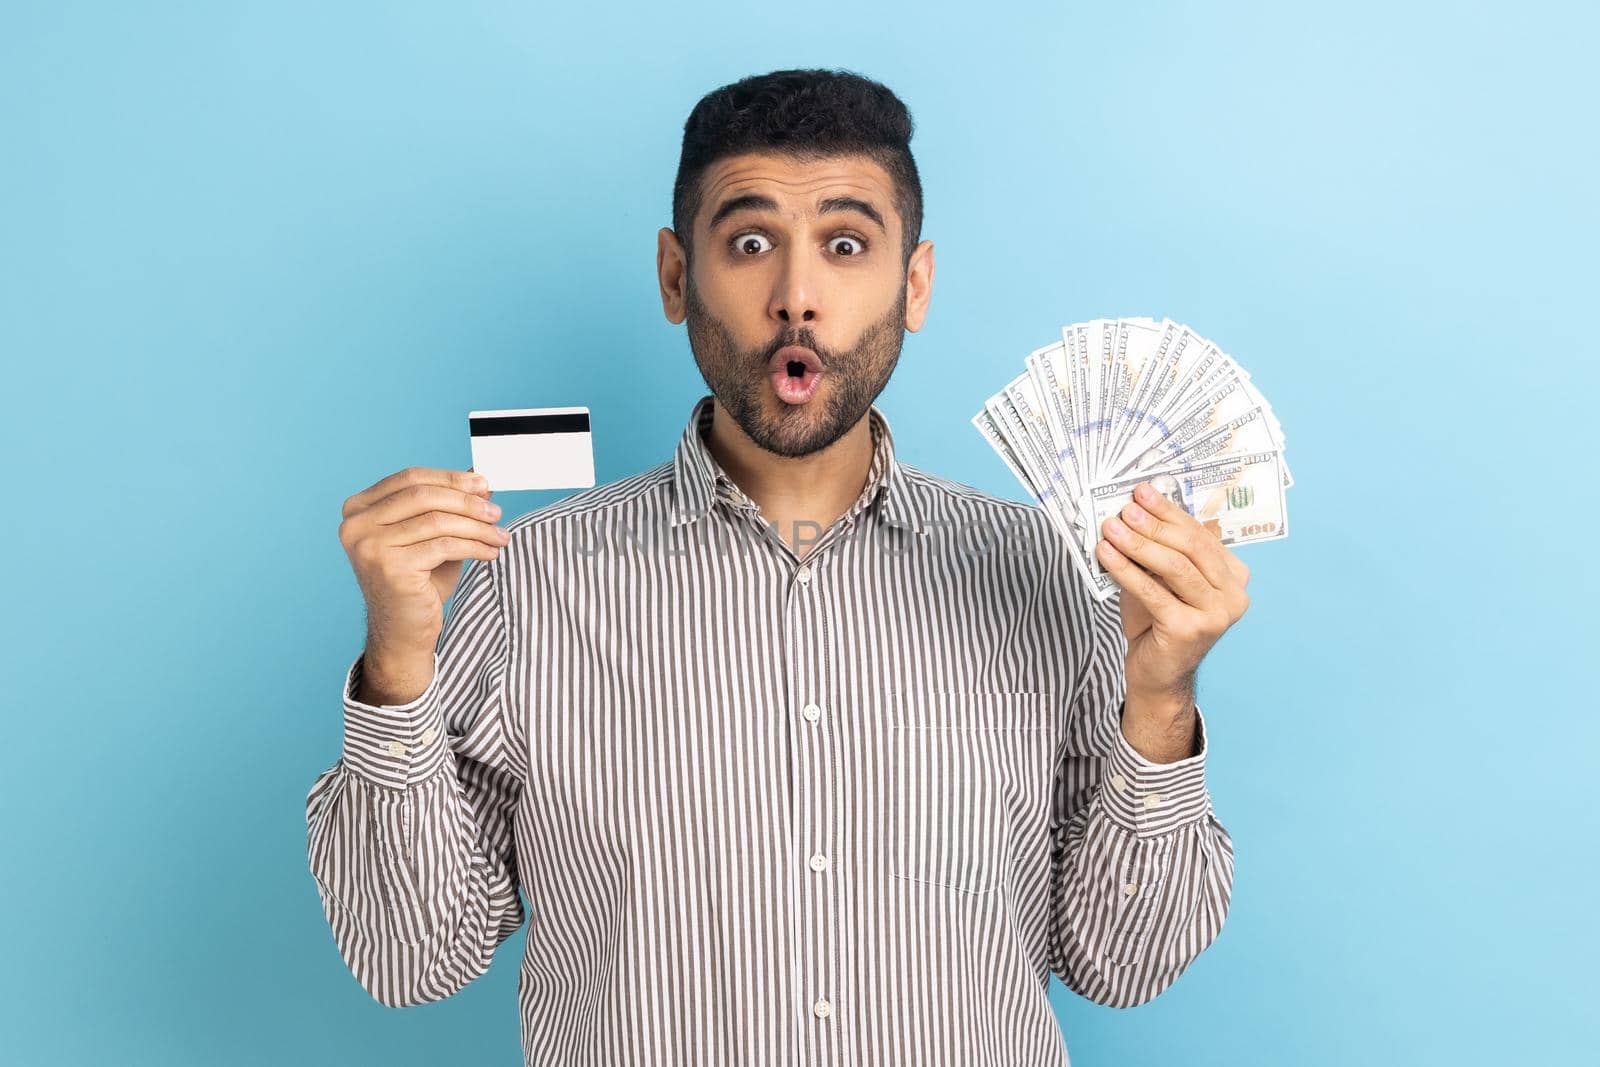 Astonished businessman with beard holding dollar banknotes and credit card, looking at camera with open mouth, wearing striped shirt. Indoor studio shot isolated on blue background.